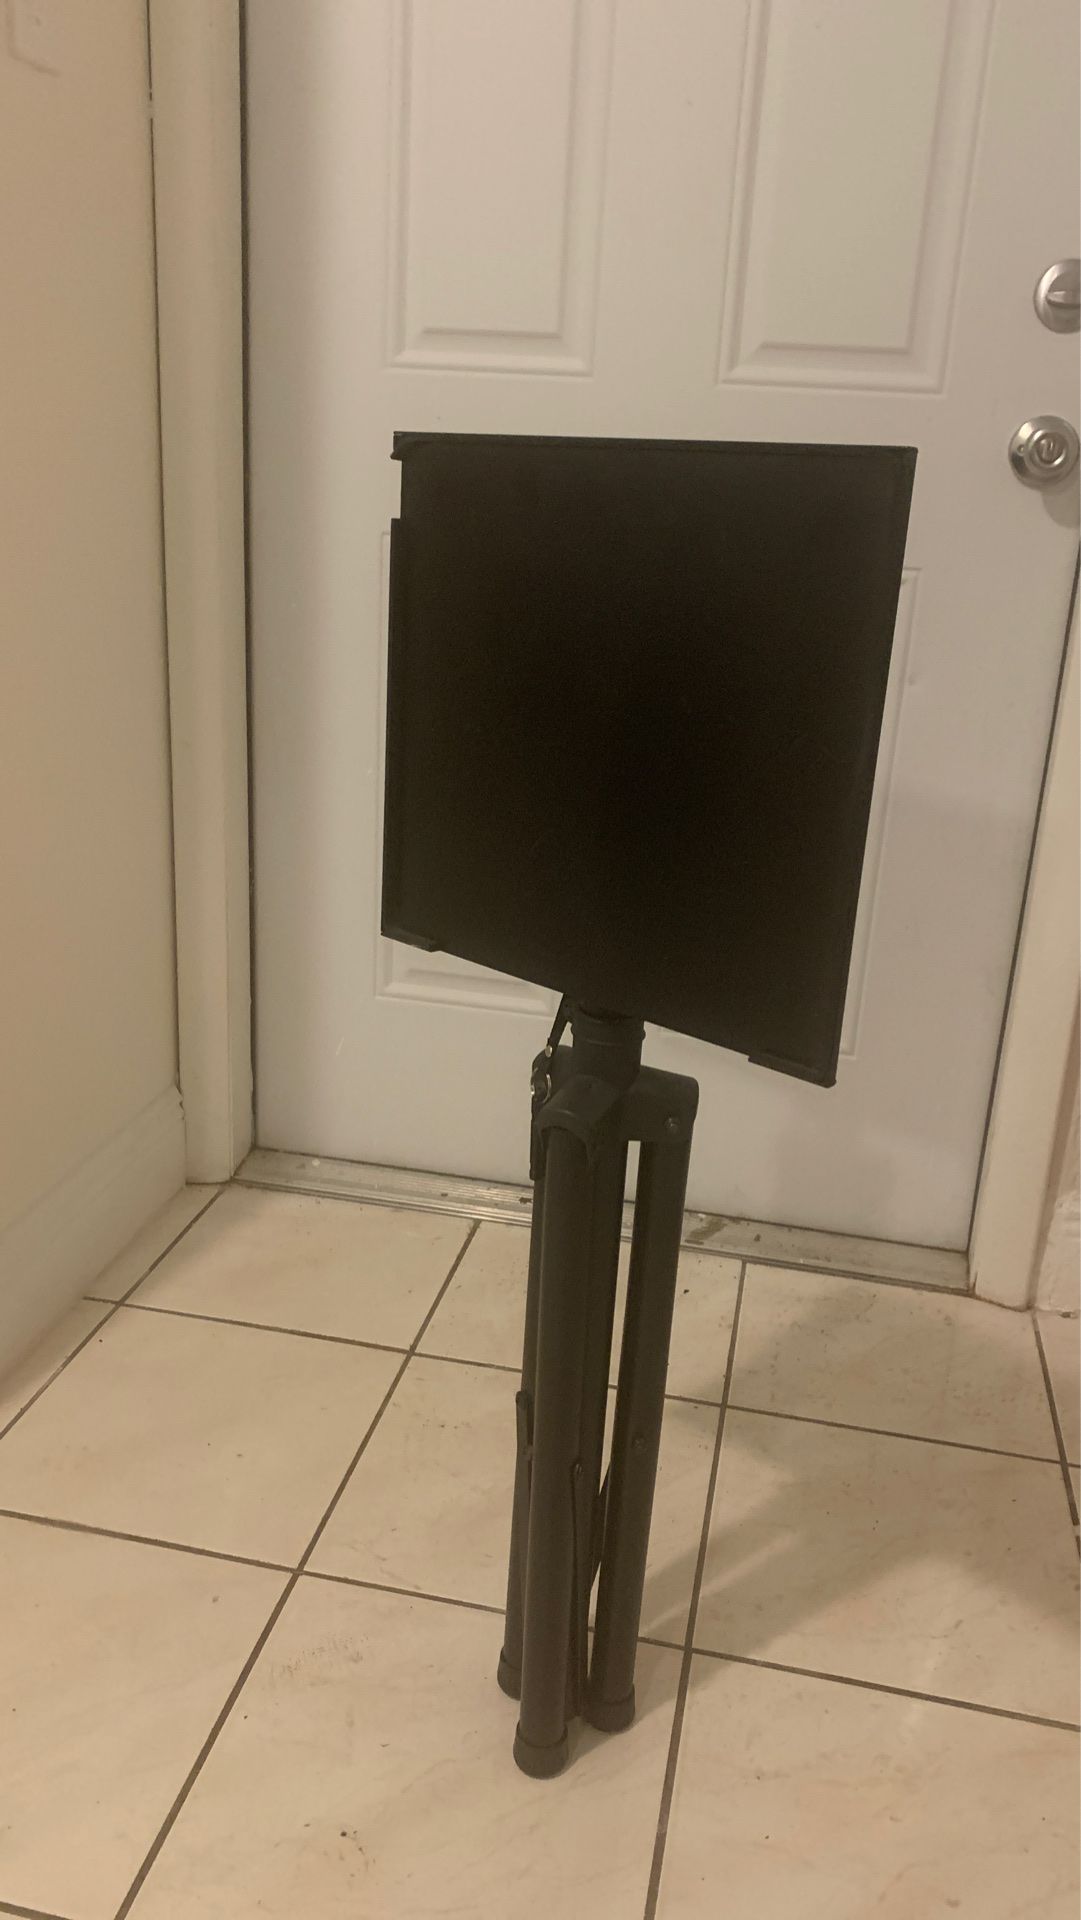 Adjustable Projector Stand